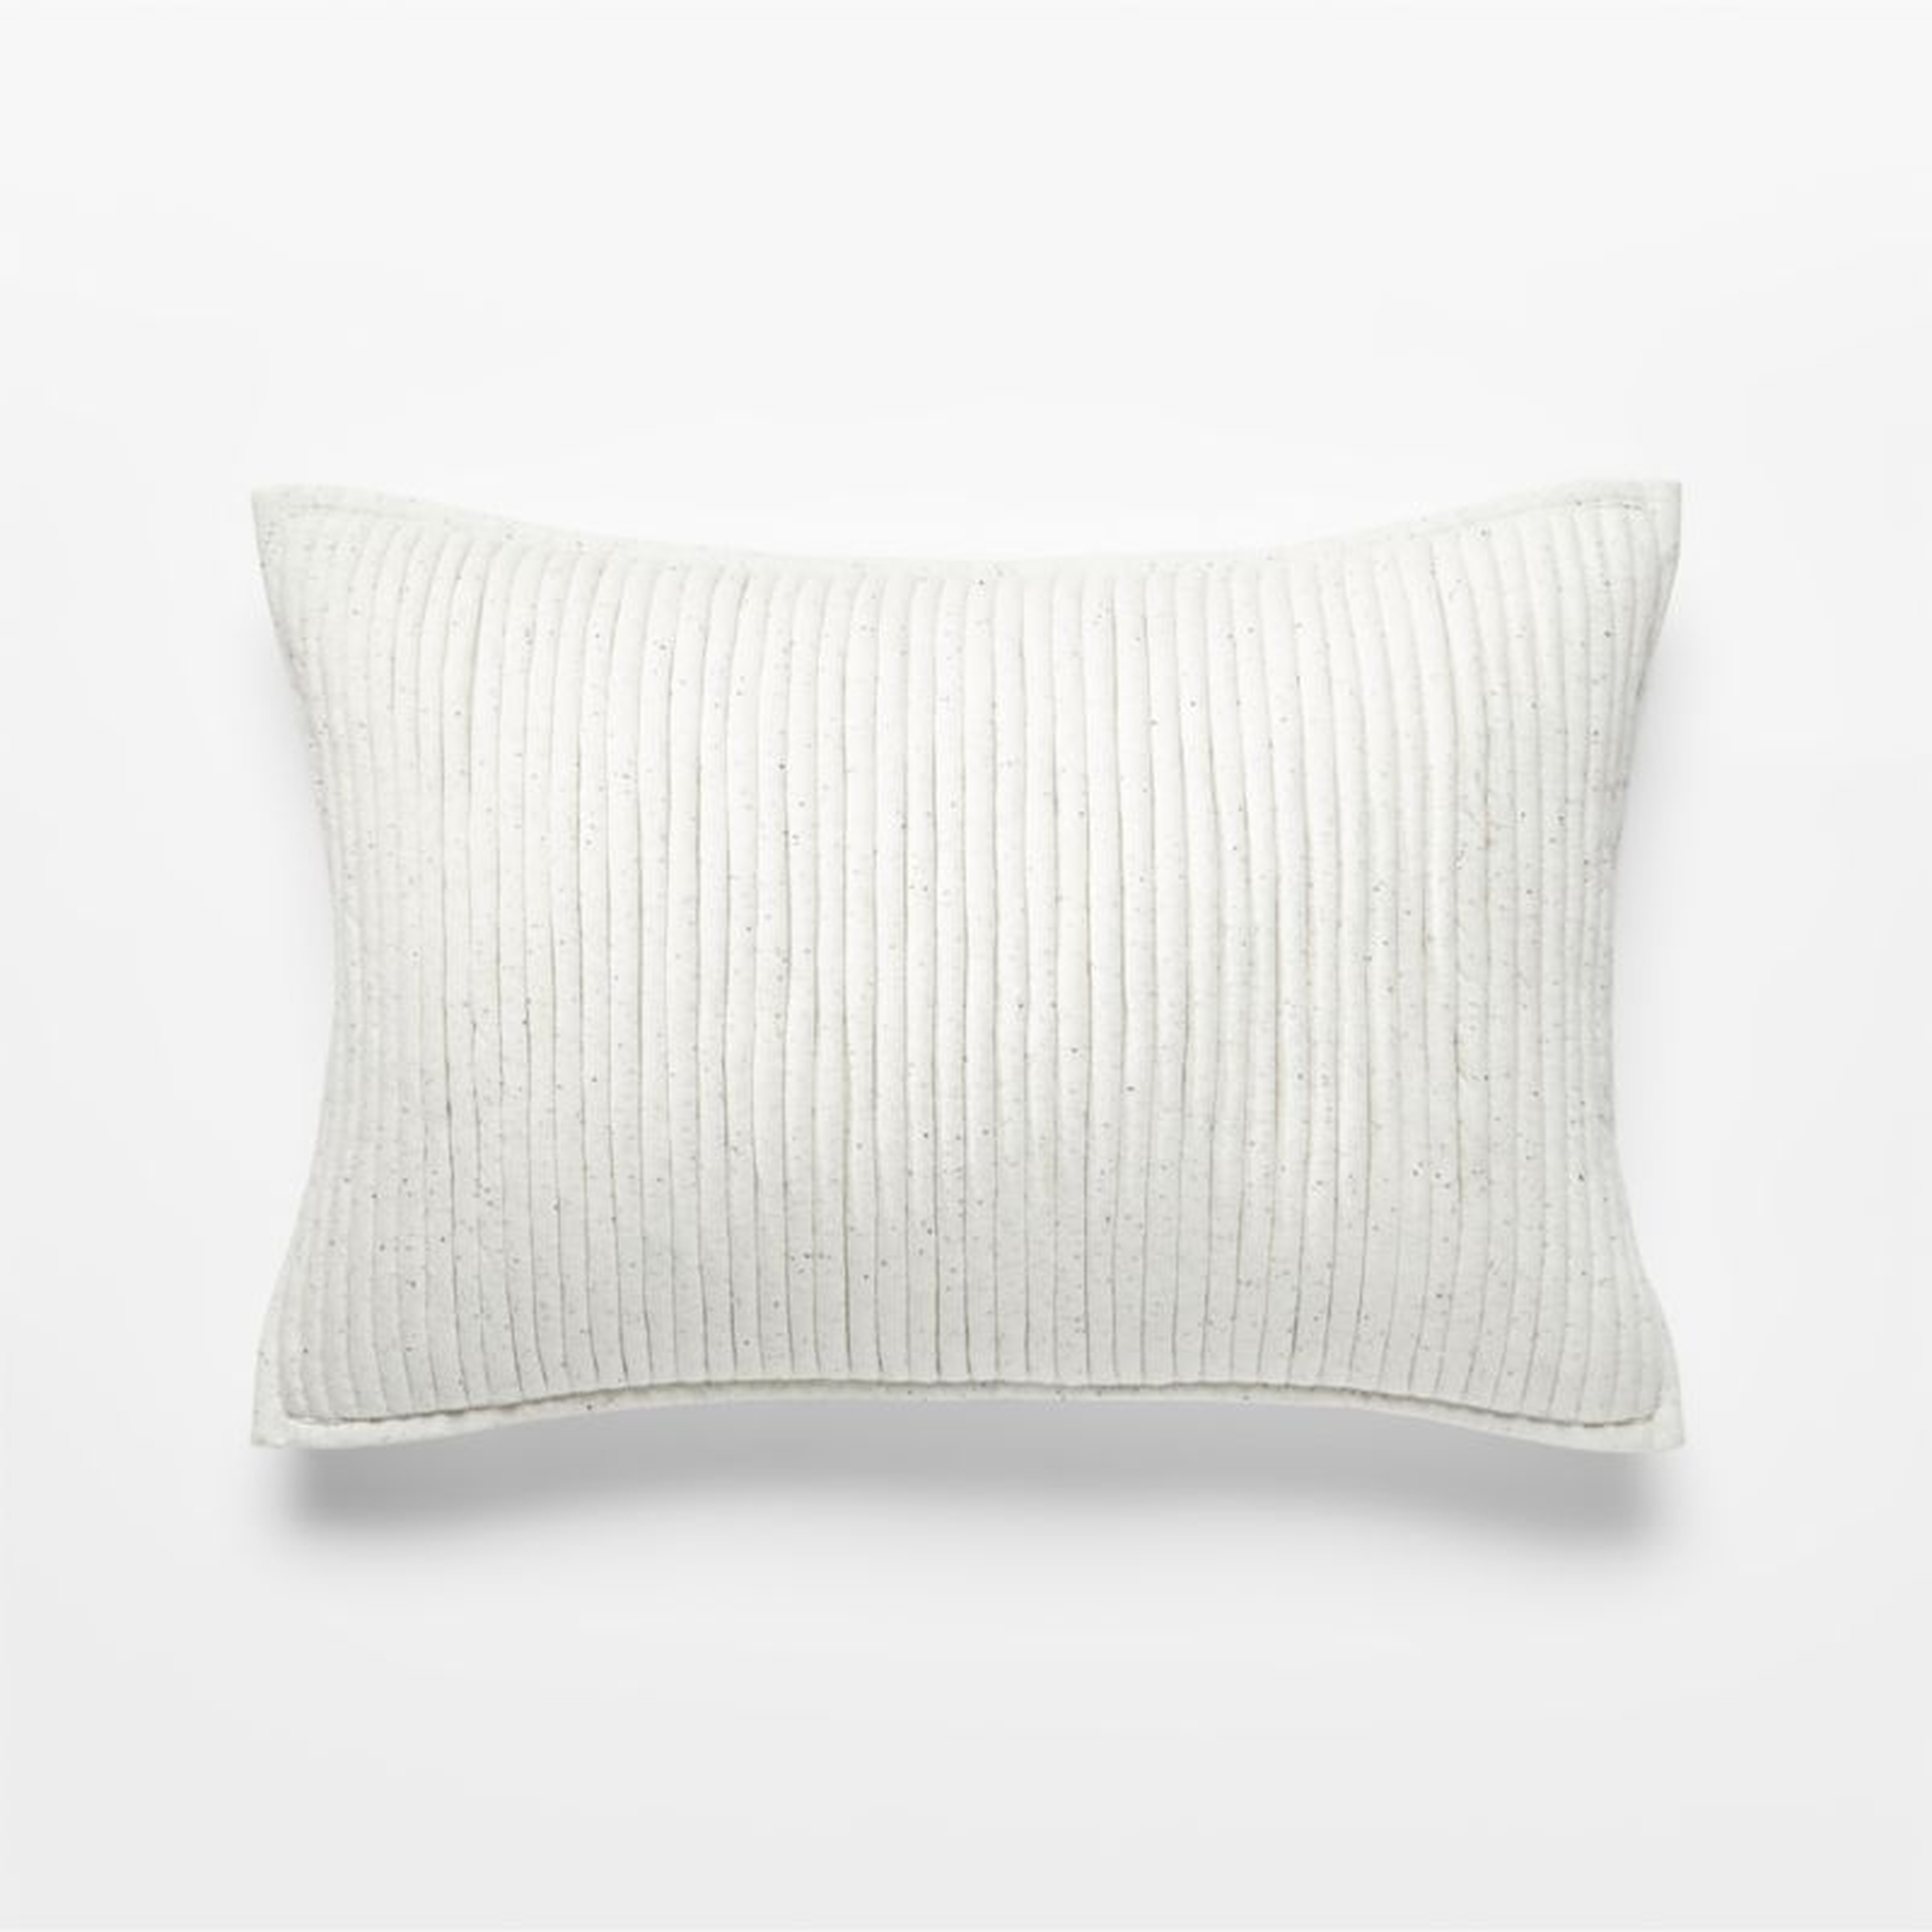 Sequence Jersey Ivory Pillow with Feather-Down Insert, 18" x 12" - CB2